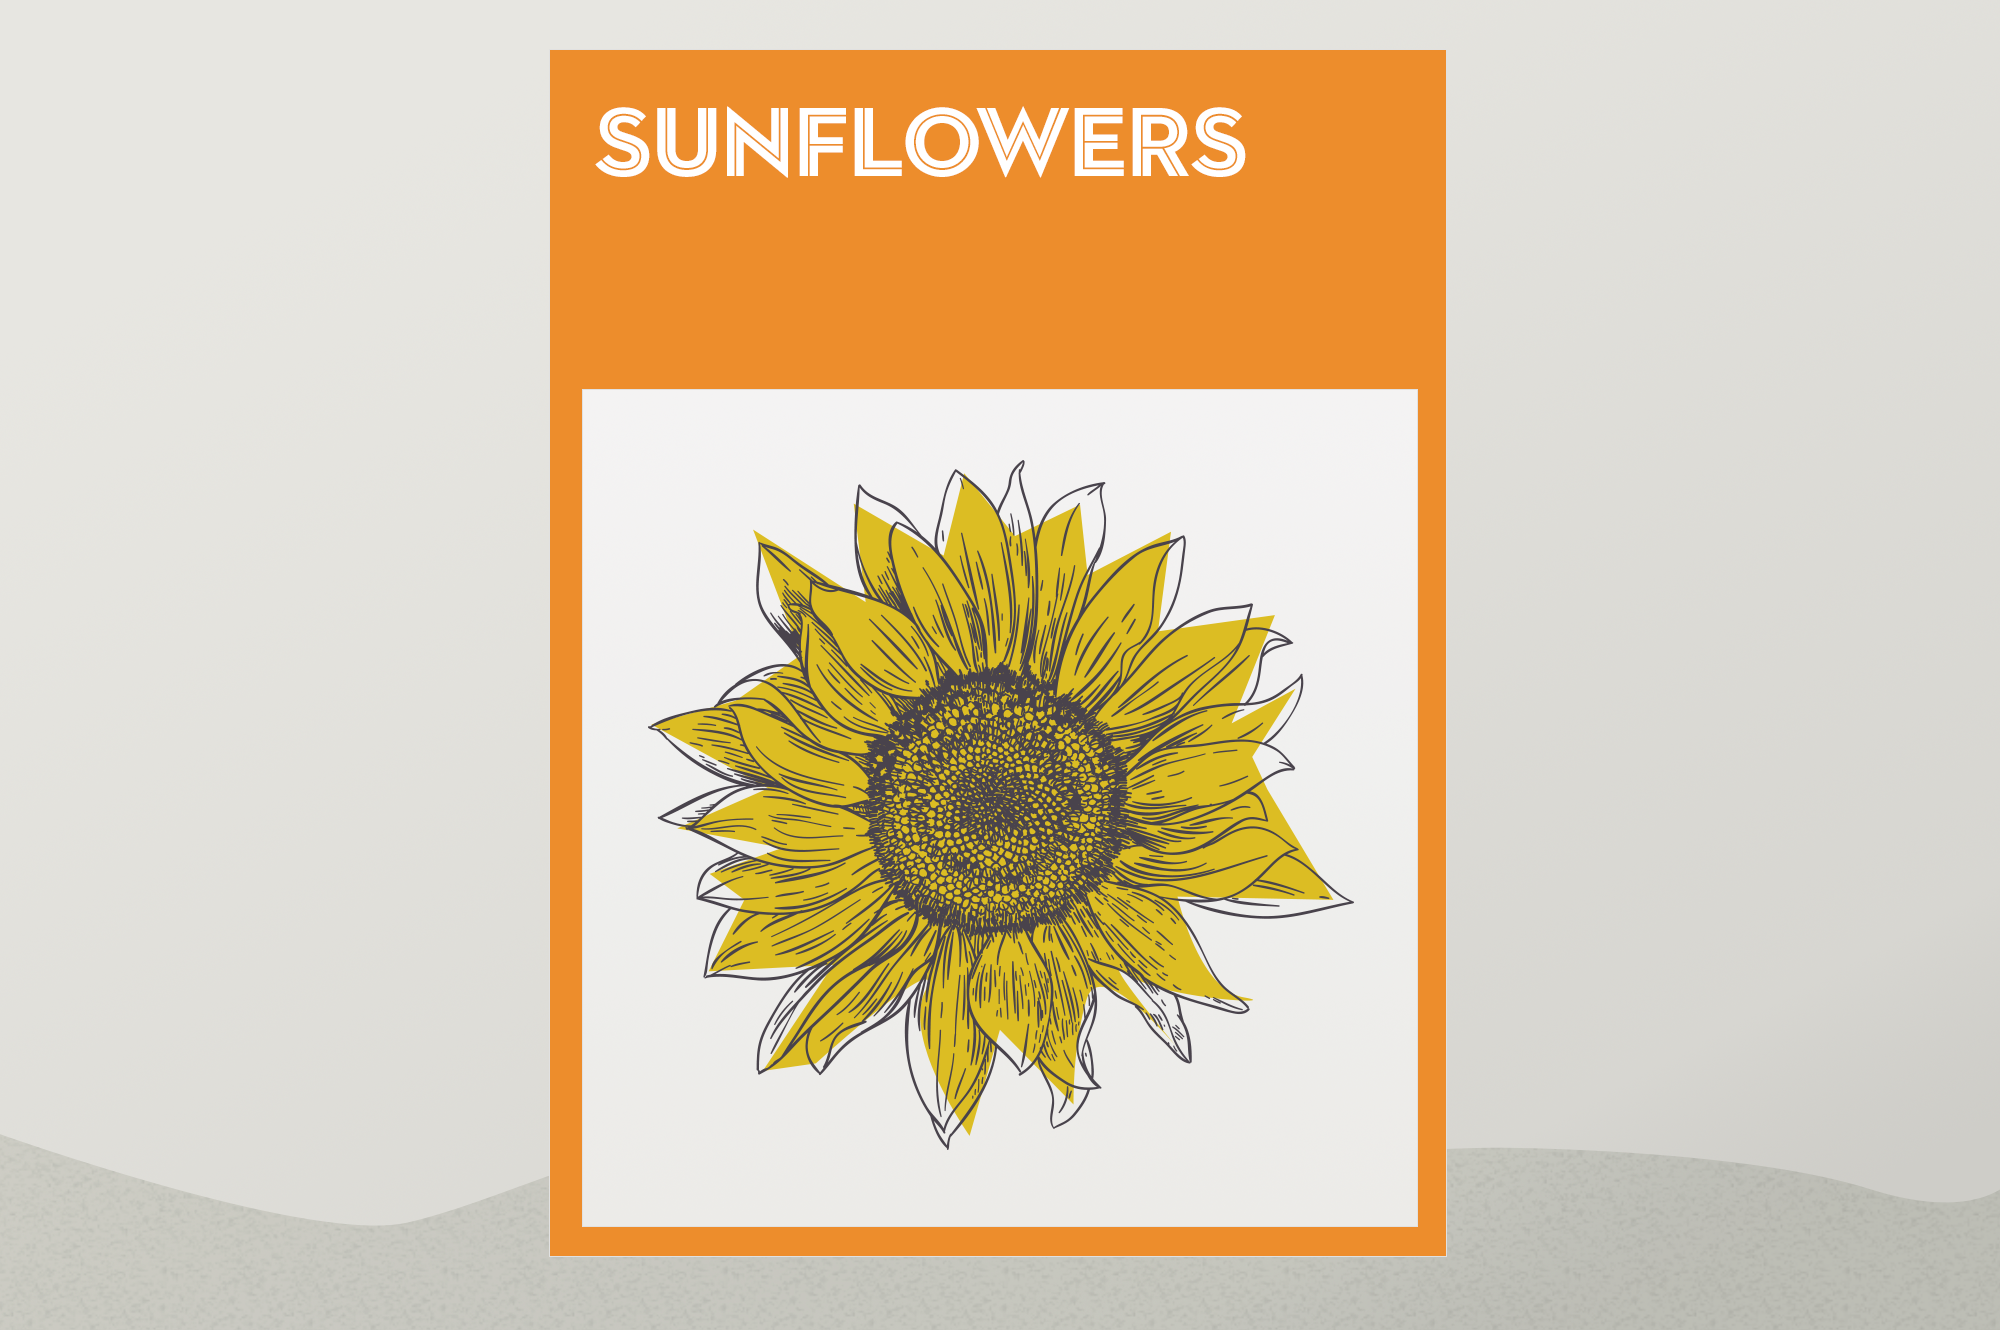 How To Grow And Use Sunflowers Harvesting And Drying Out Sunflower Seeds,Studio Apartment Small Apartment Decorating Ideas On A Budget